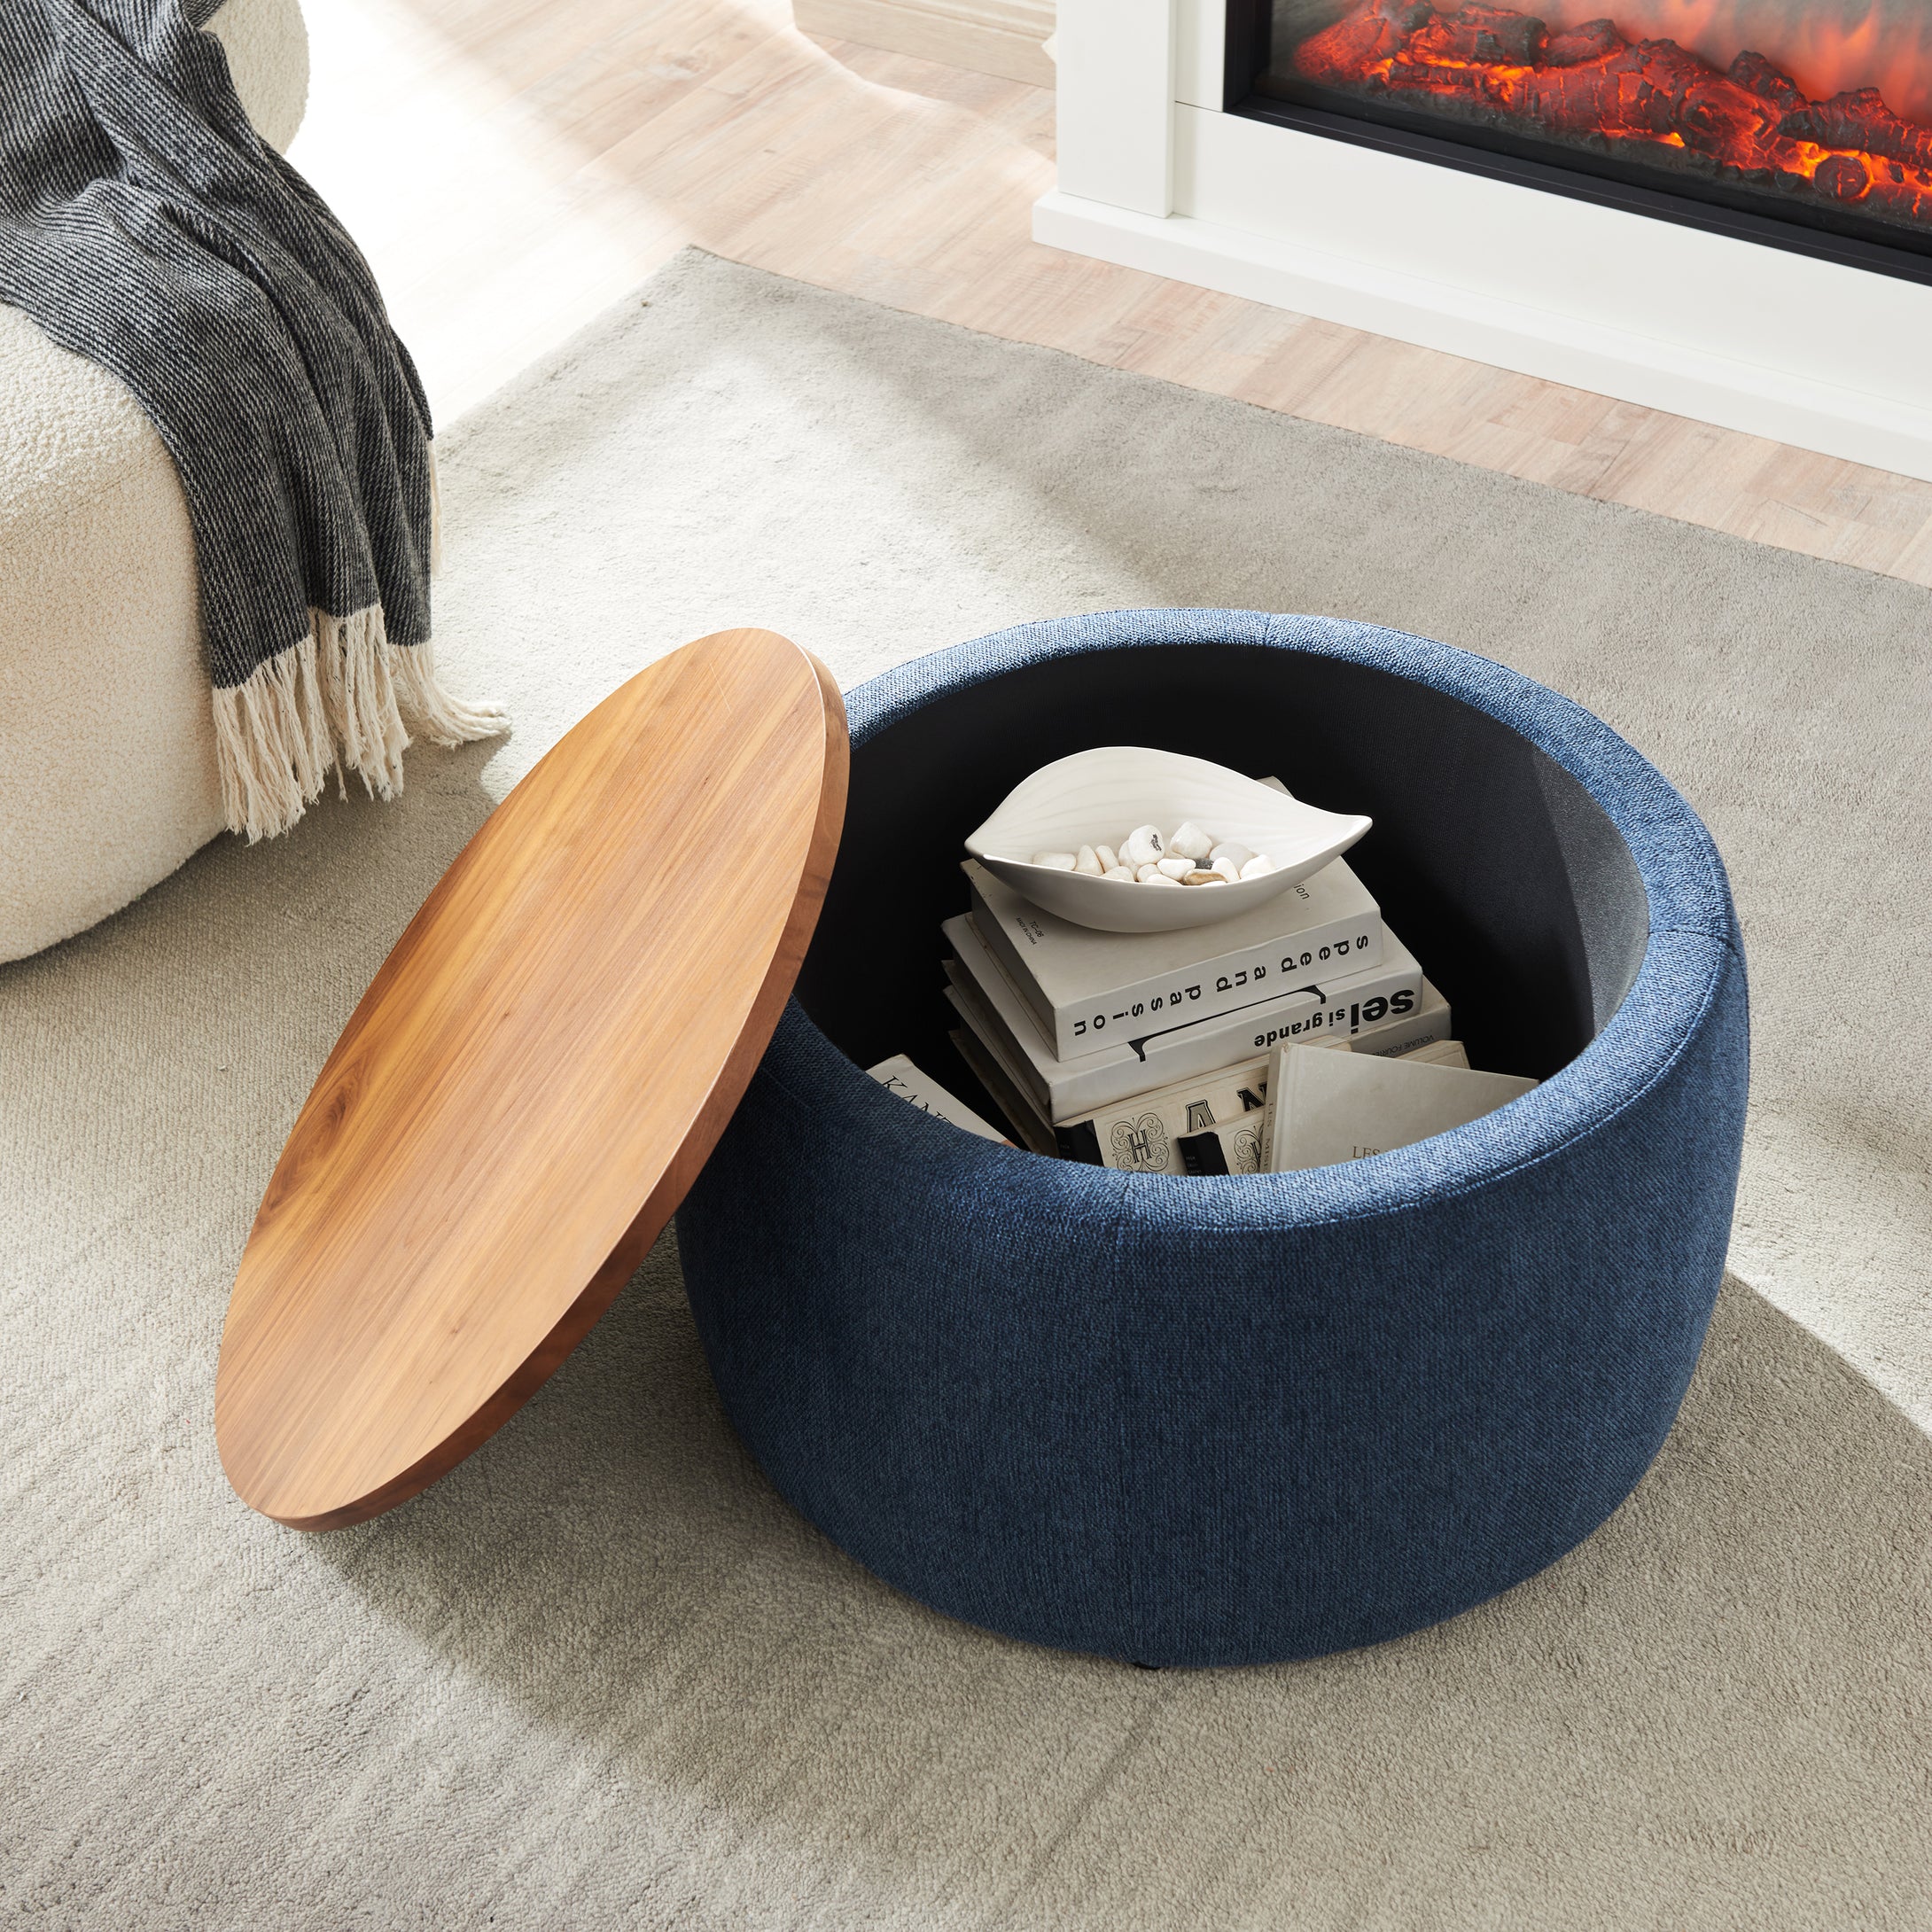 Round Storage Ottoman, 2 in 1 Function, Works as End Table or Ottoman, Navy